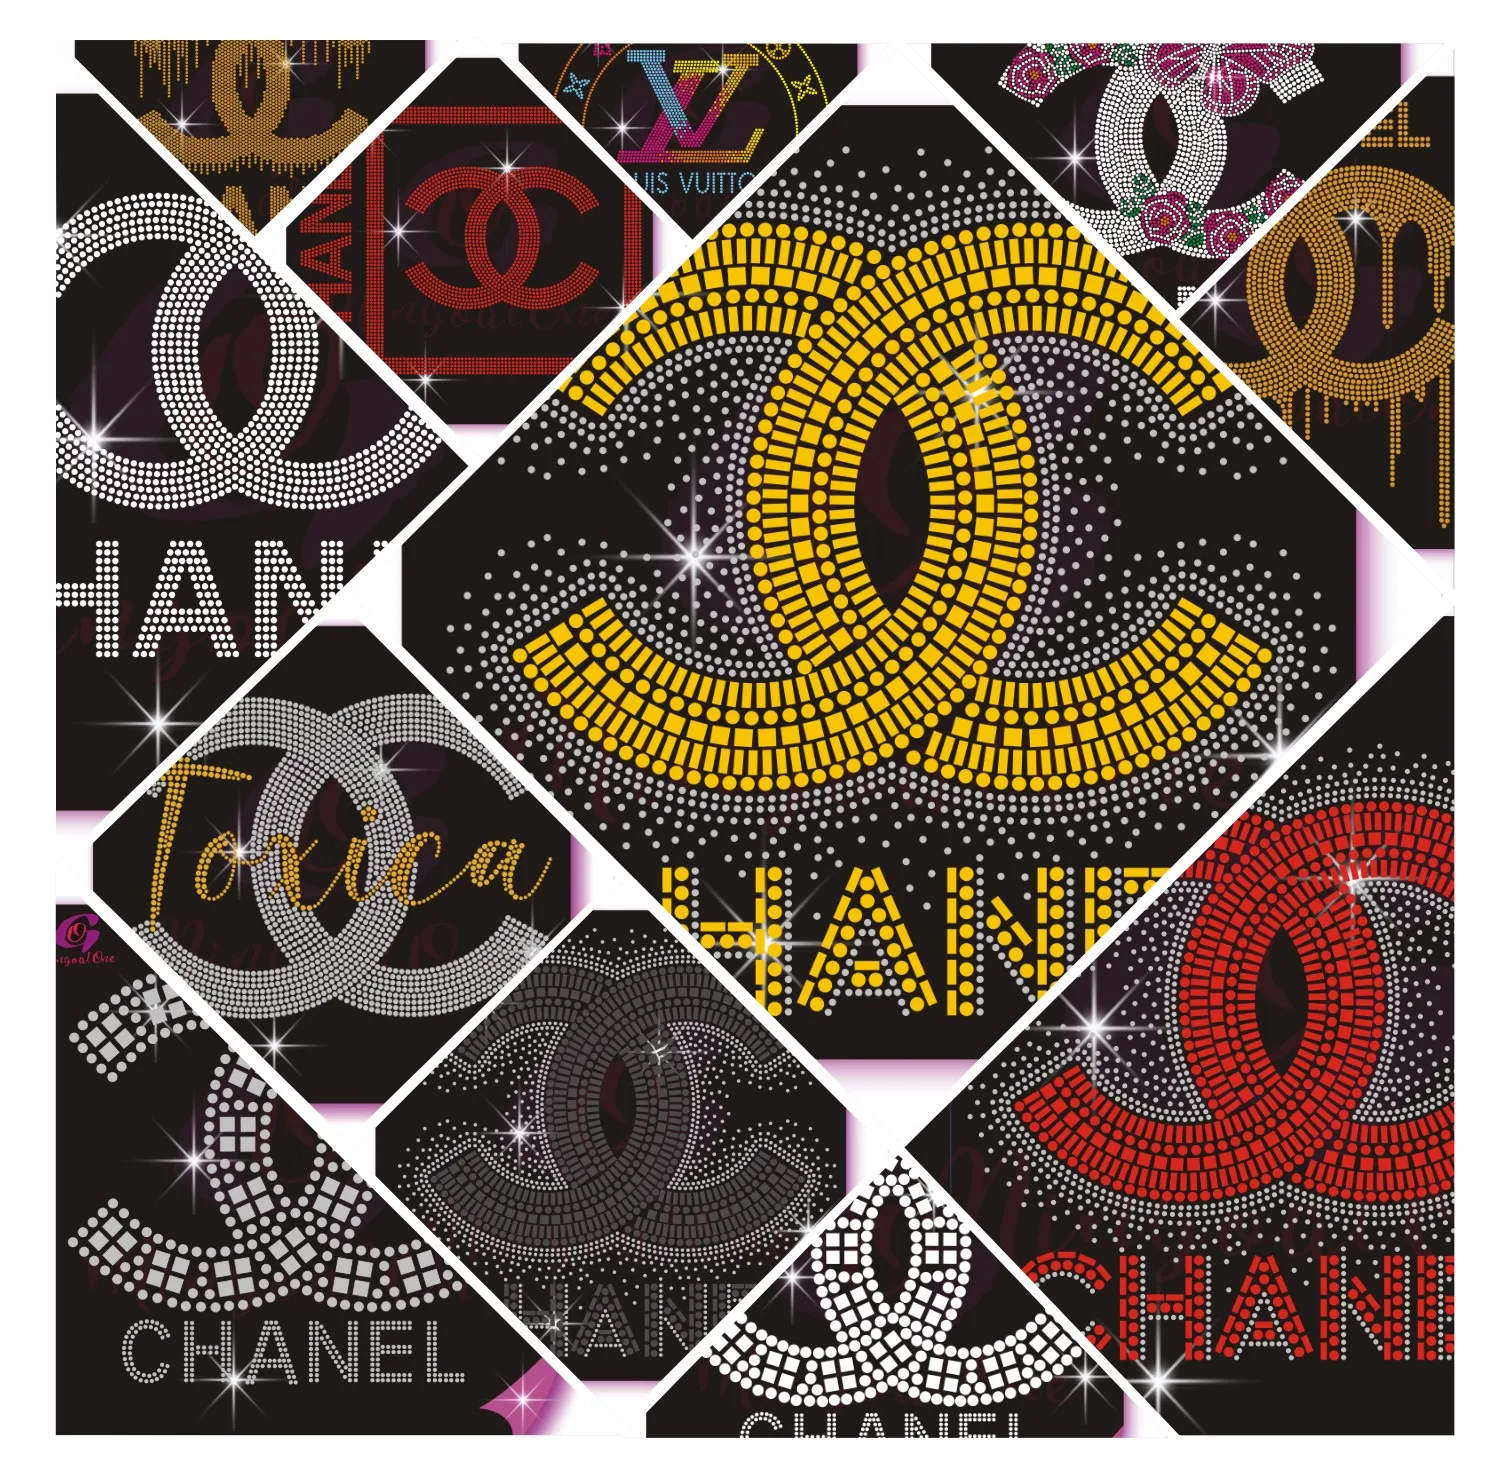 

Discount! Fast Delivery High Quality Iron Ons Stone Design Custom Rhinestone Transfer Motif, Select from color chart